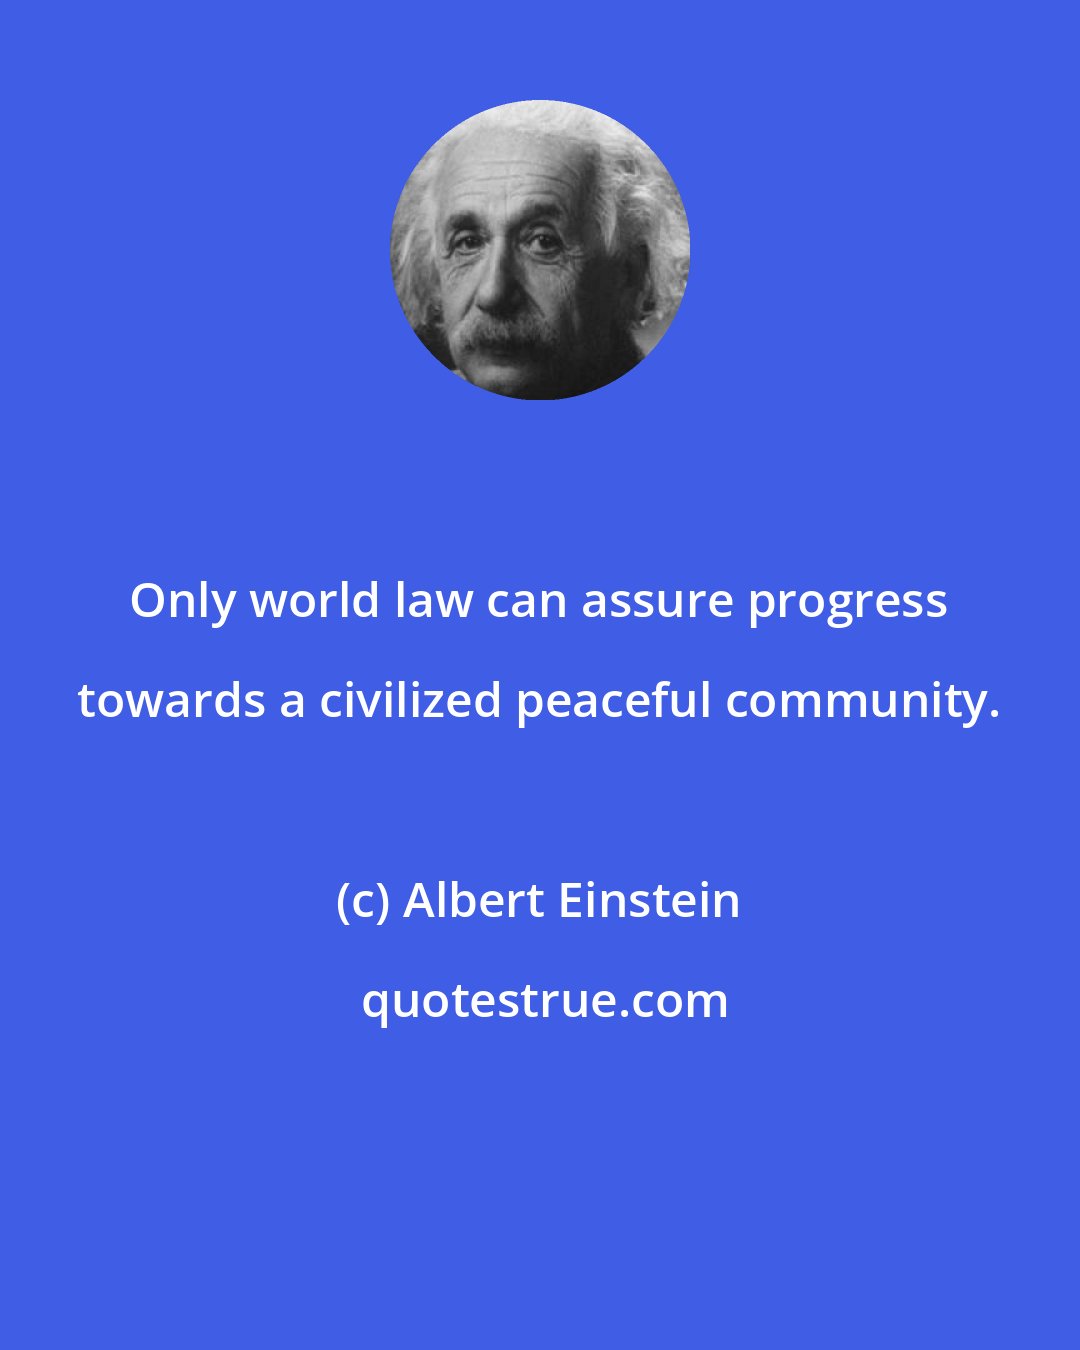 Albert Einstein: Only world law can assure progress towards a civilized peaceful community.